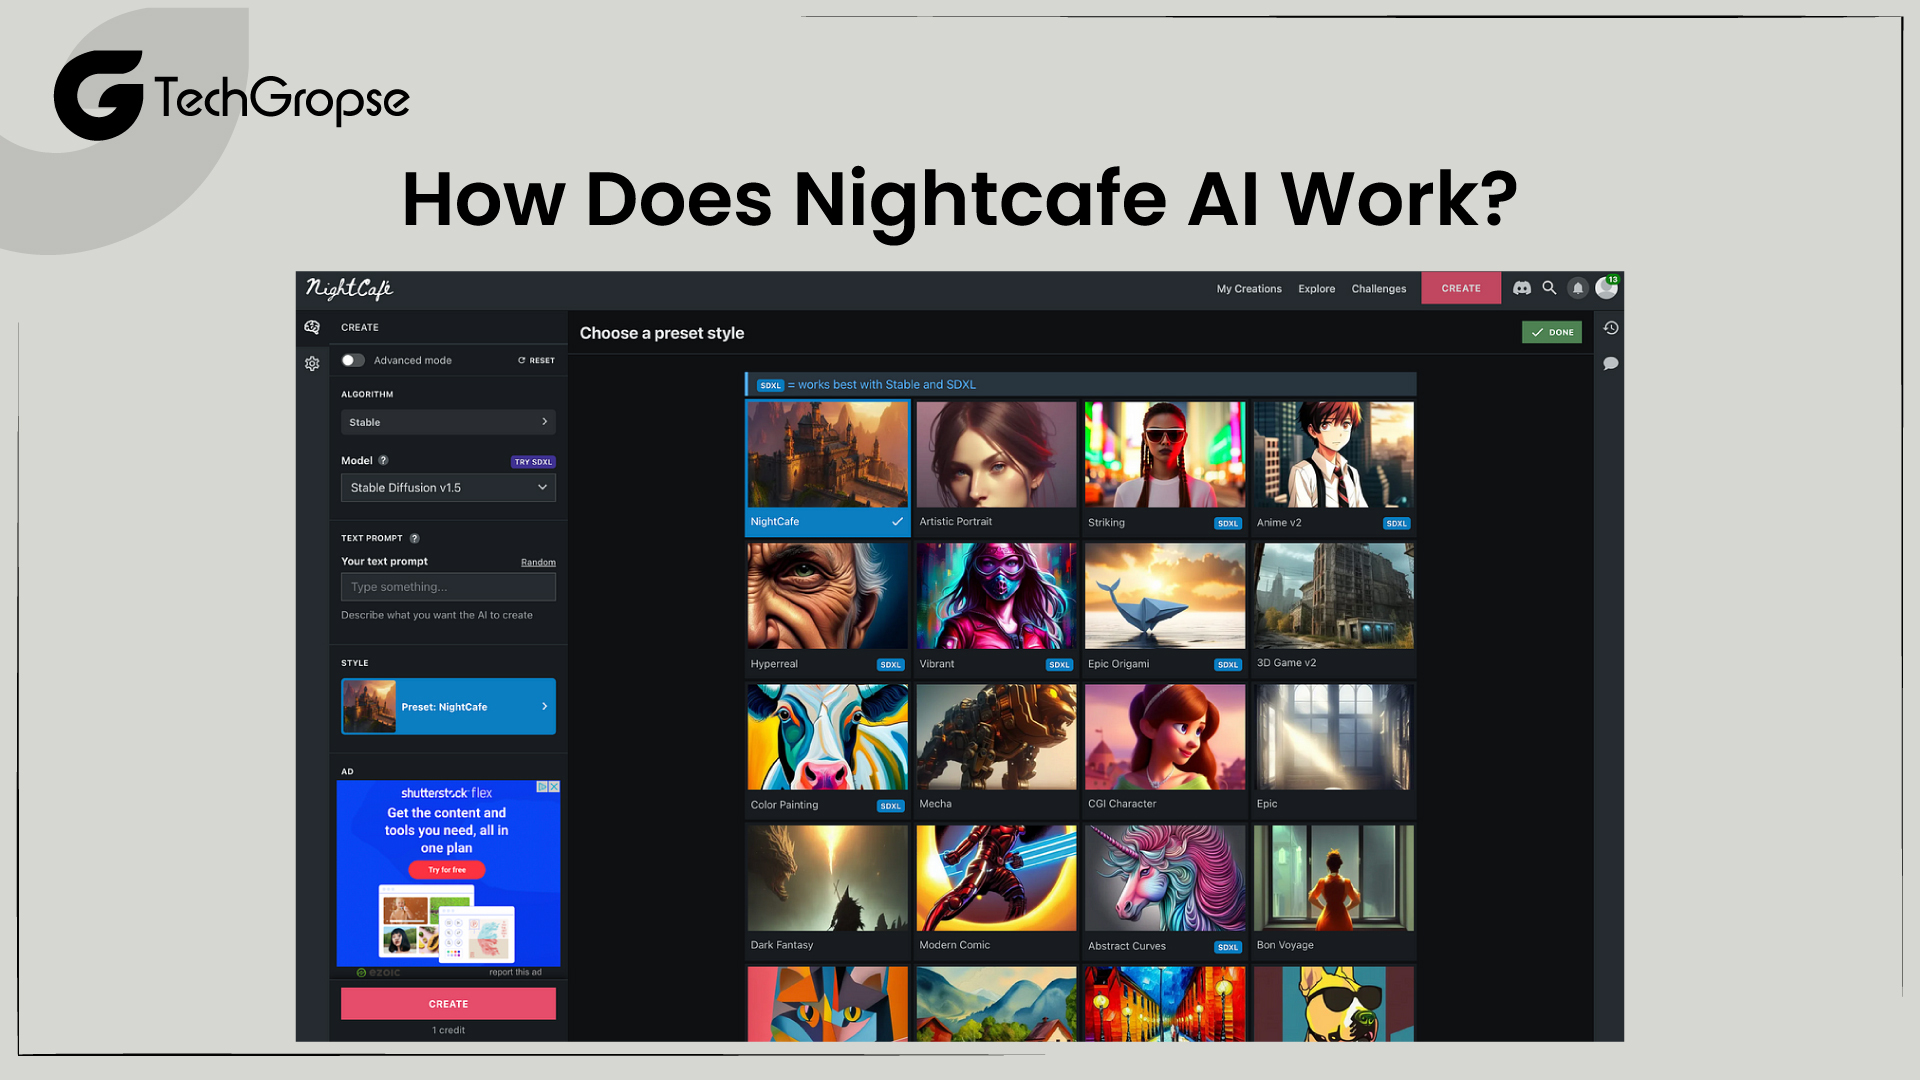 How Does Nightcafe AI Work?